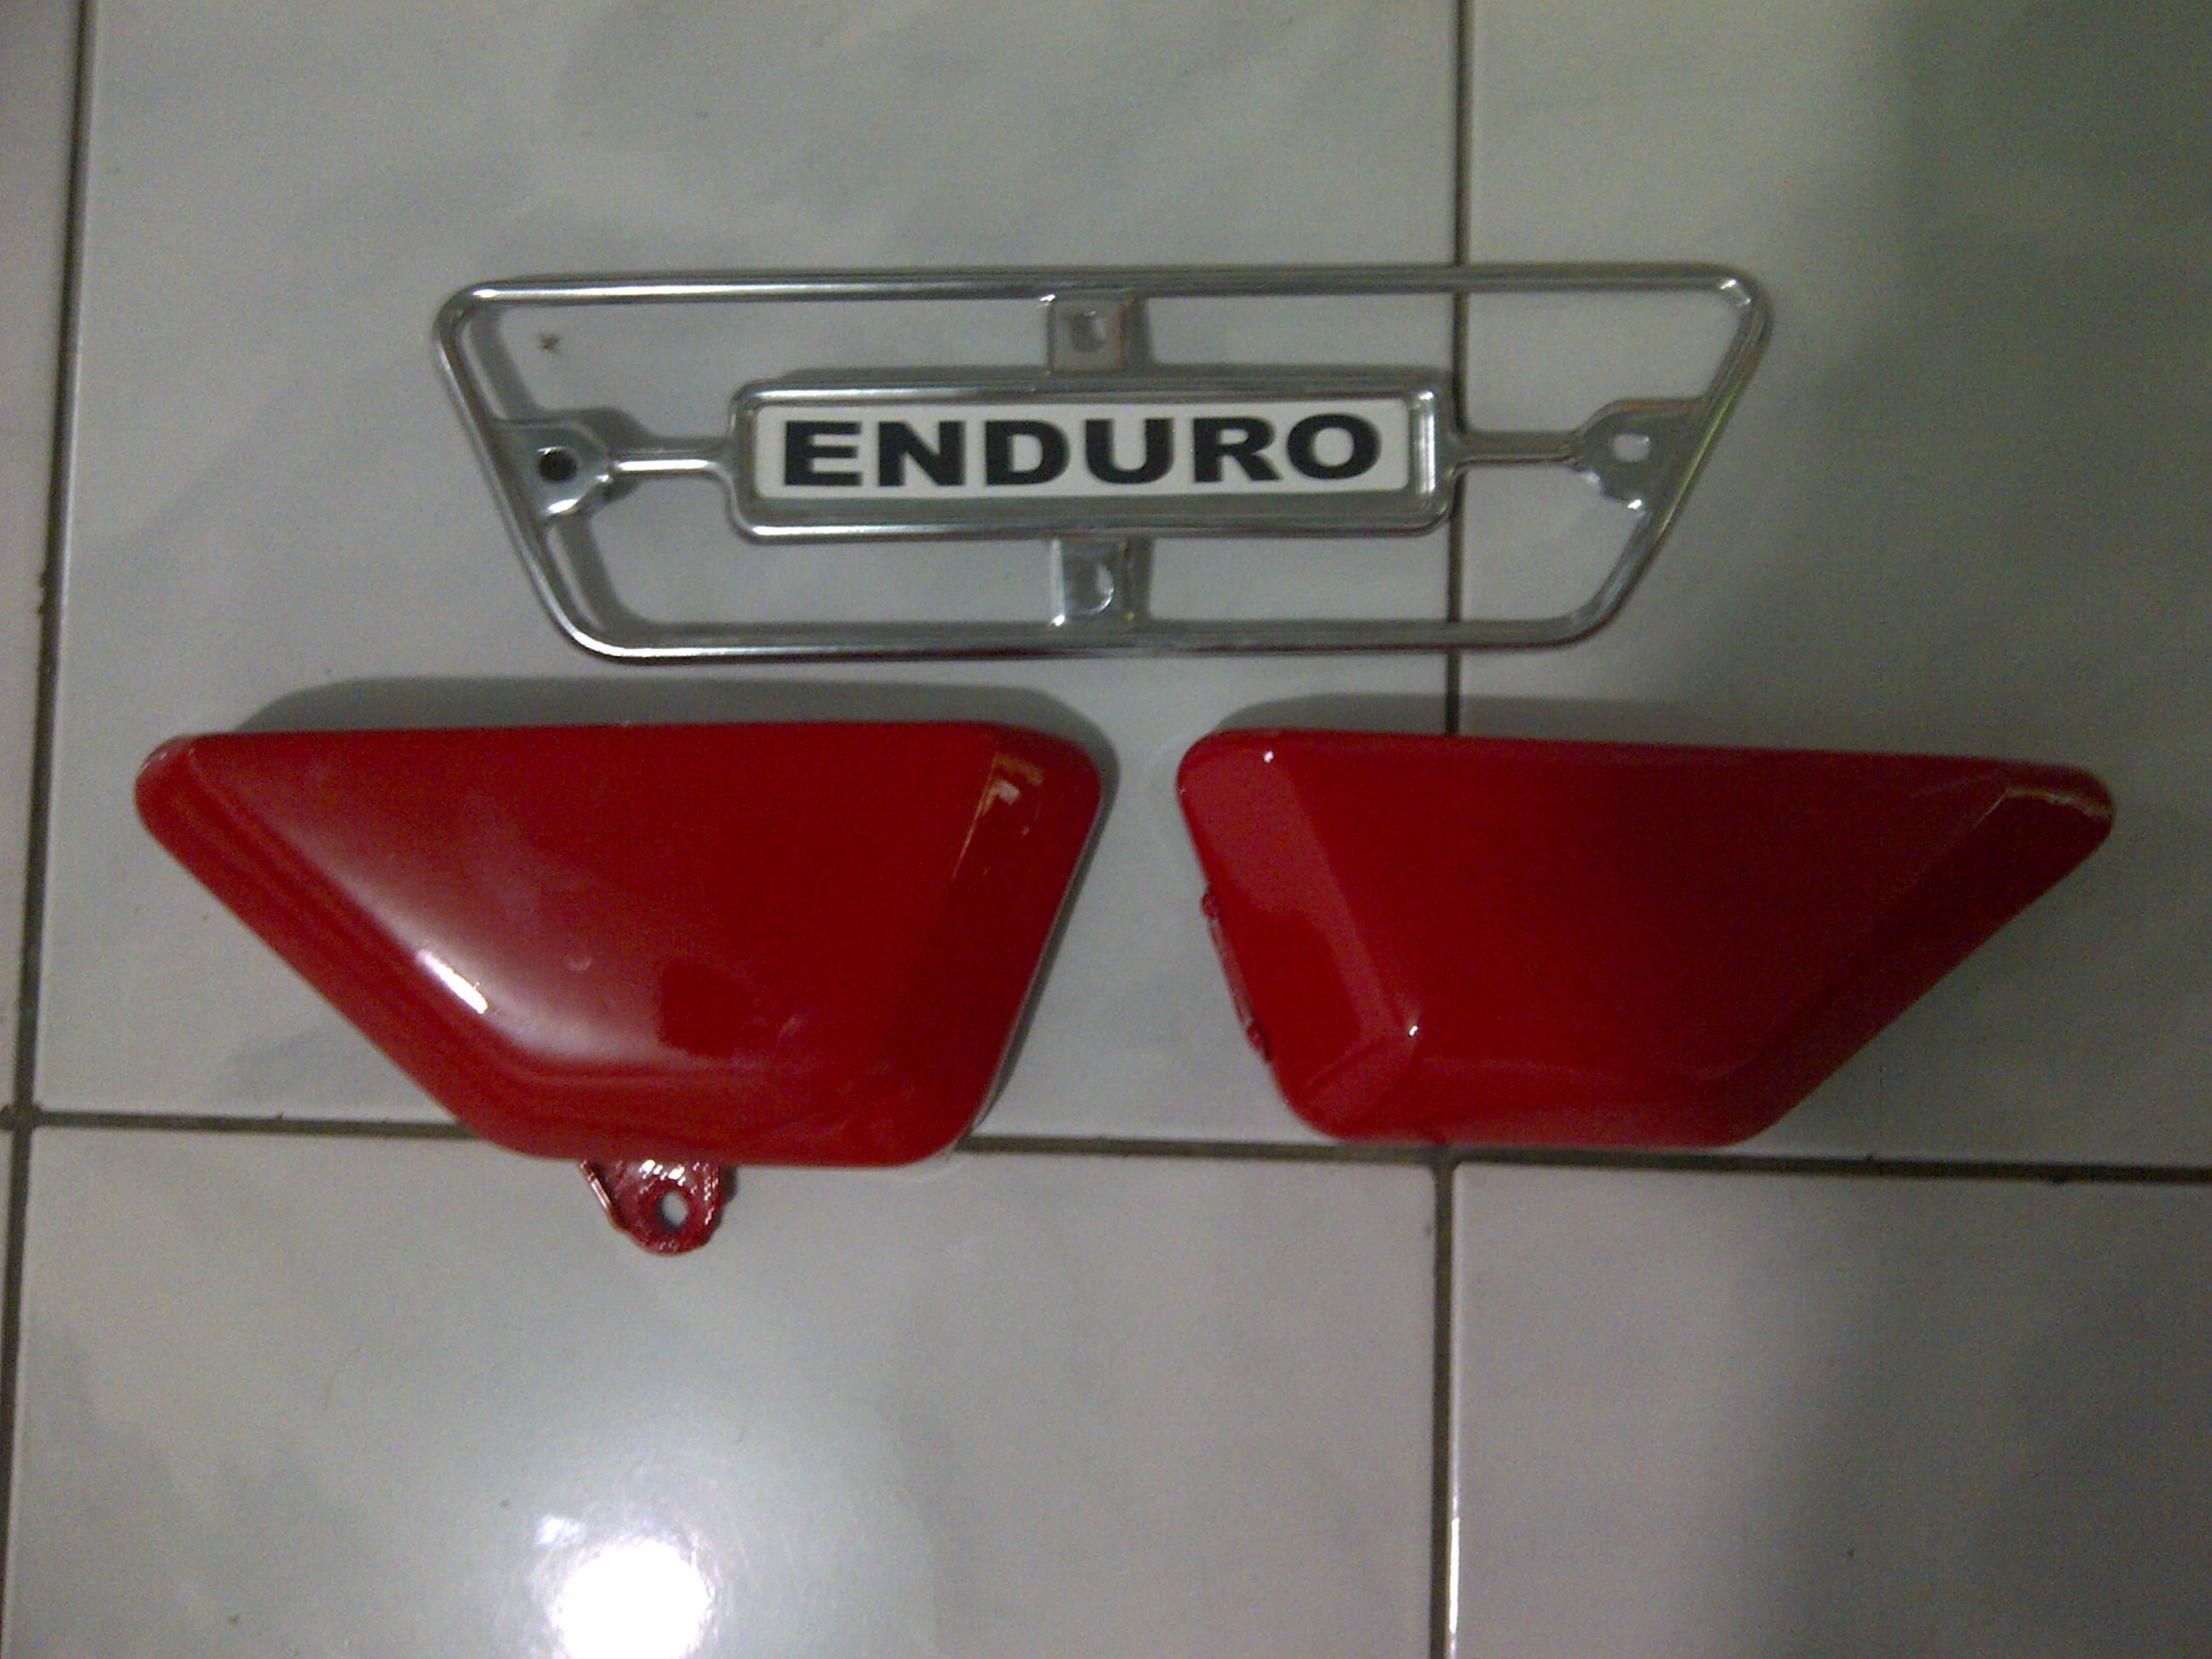 WTS Yamaha DT 100 Enduro 1978 Kidnapped Bikers Store